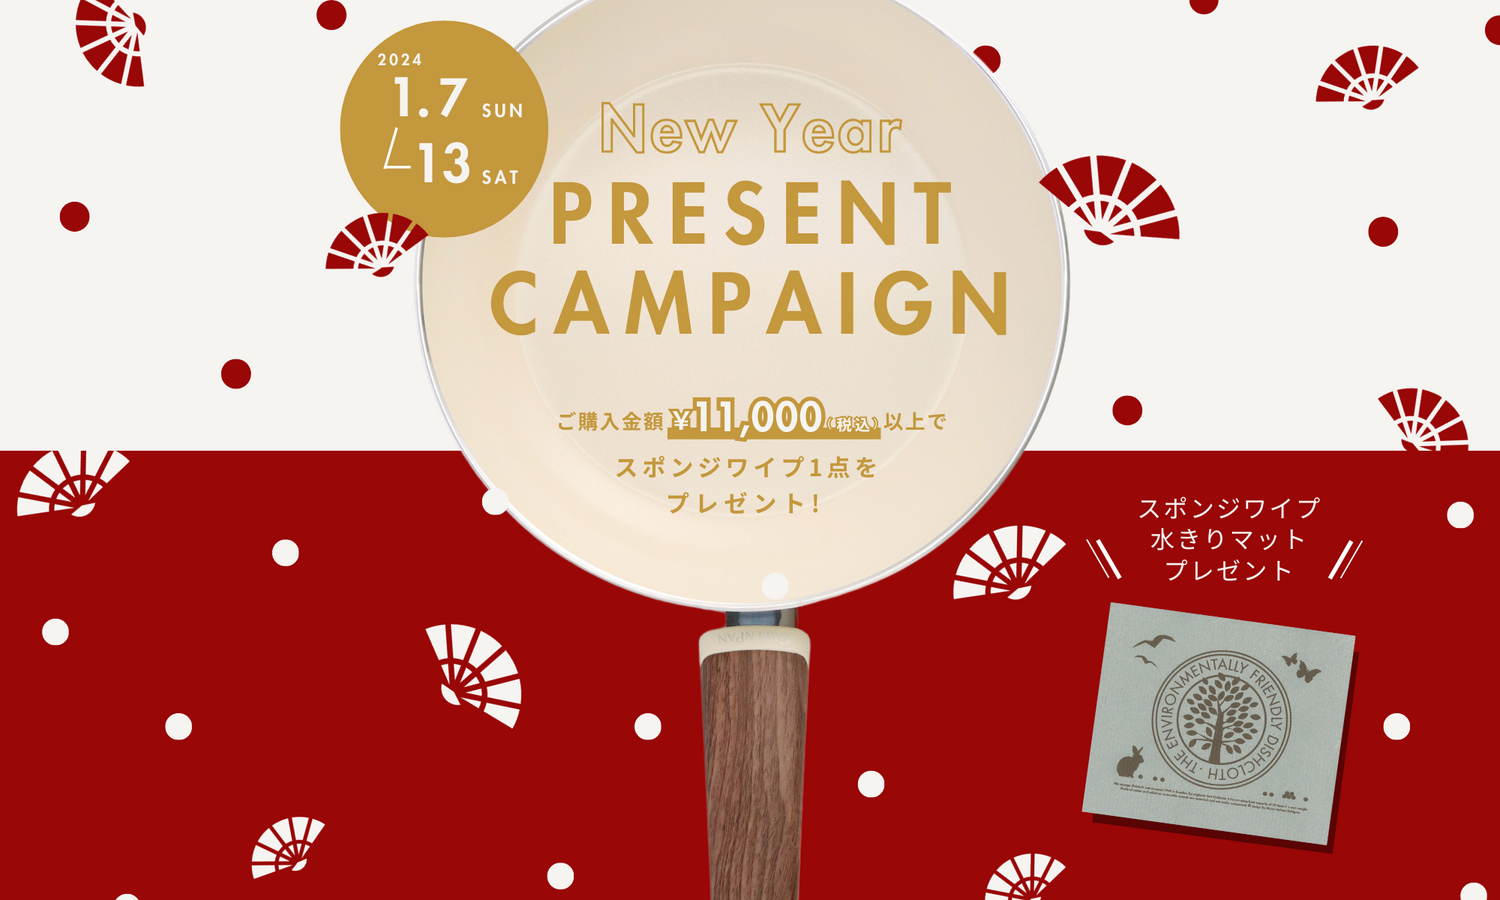 New Year PRESENT CAMPAIGN 2024